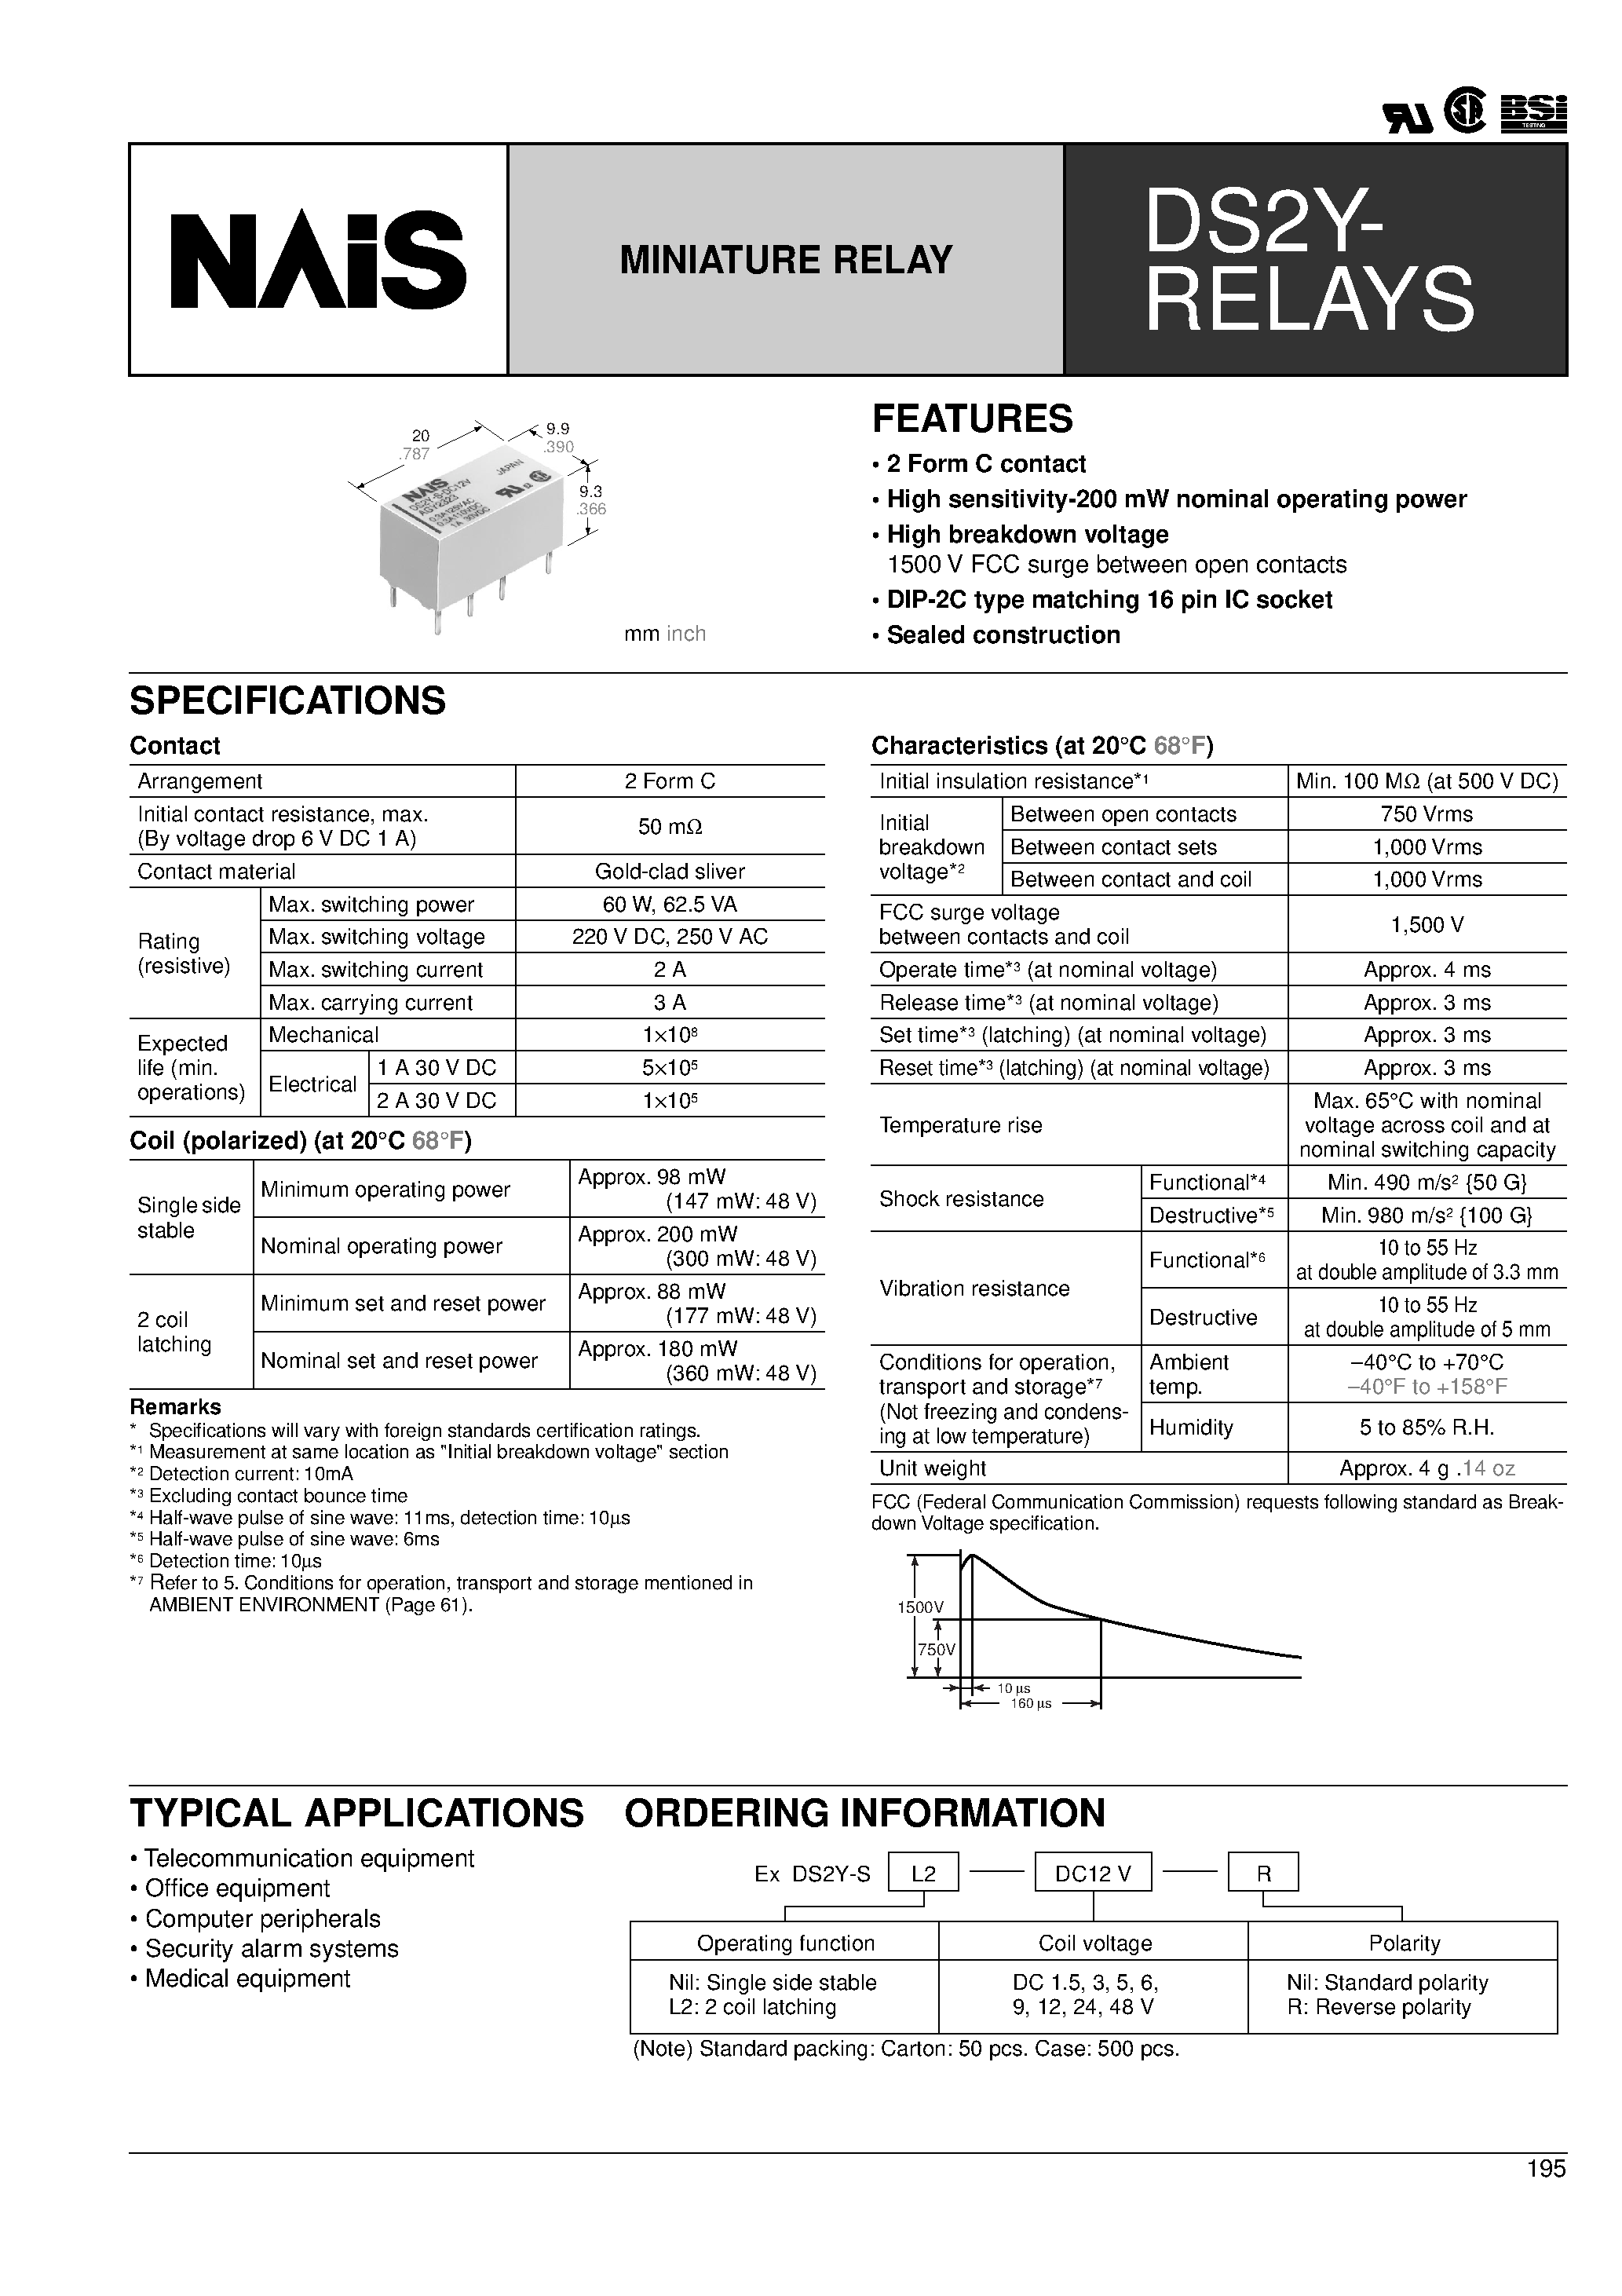 Datasheet DS2Y-S-DC24V - 2 Form C contact High sensitivity-200 mW nominal operating power page 1